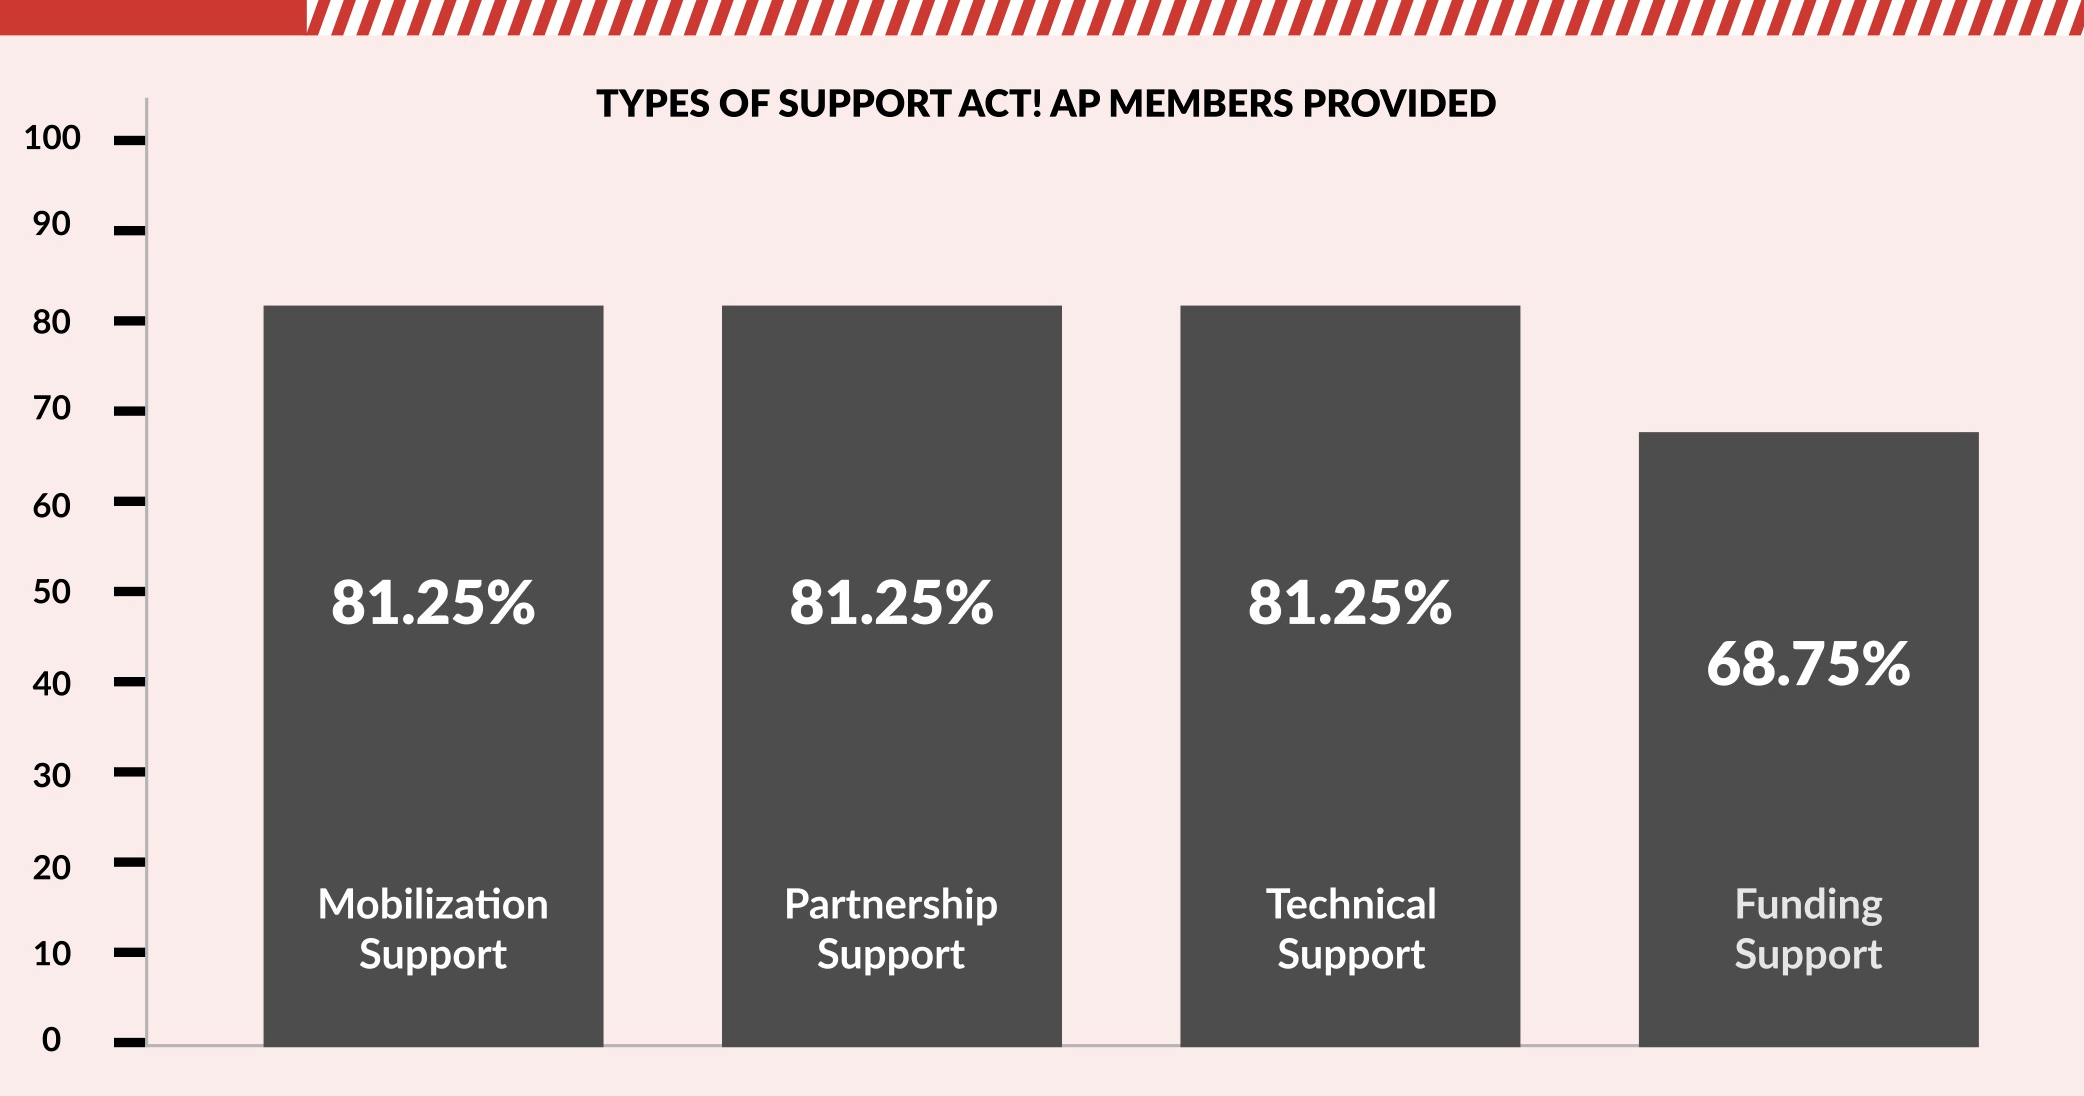 Types of support provided